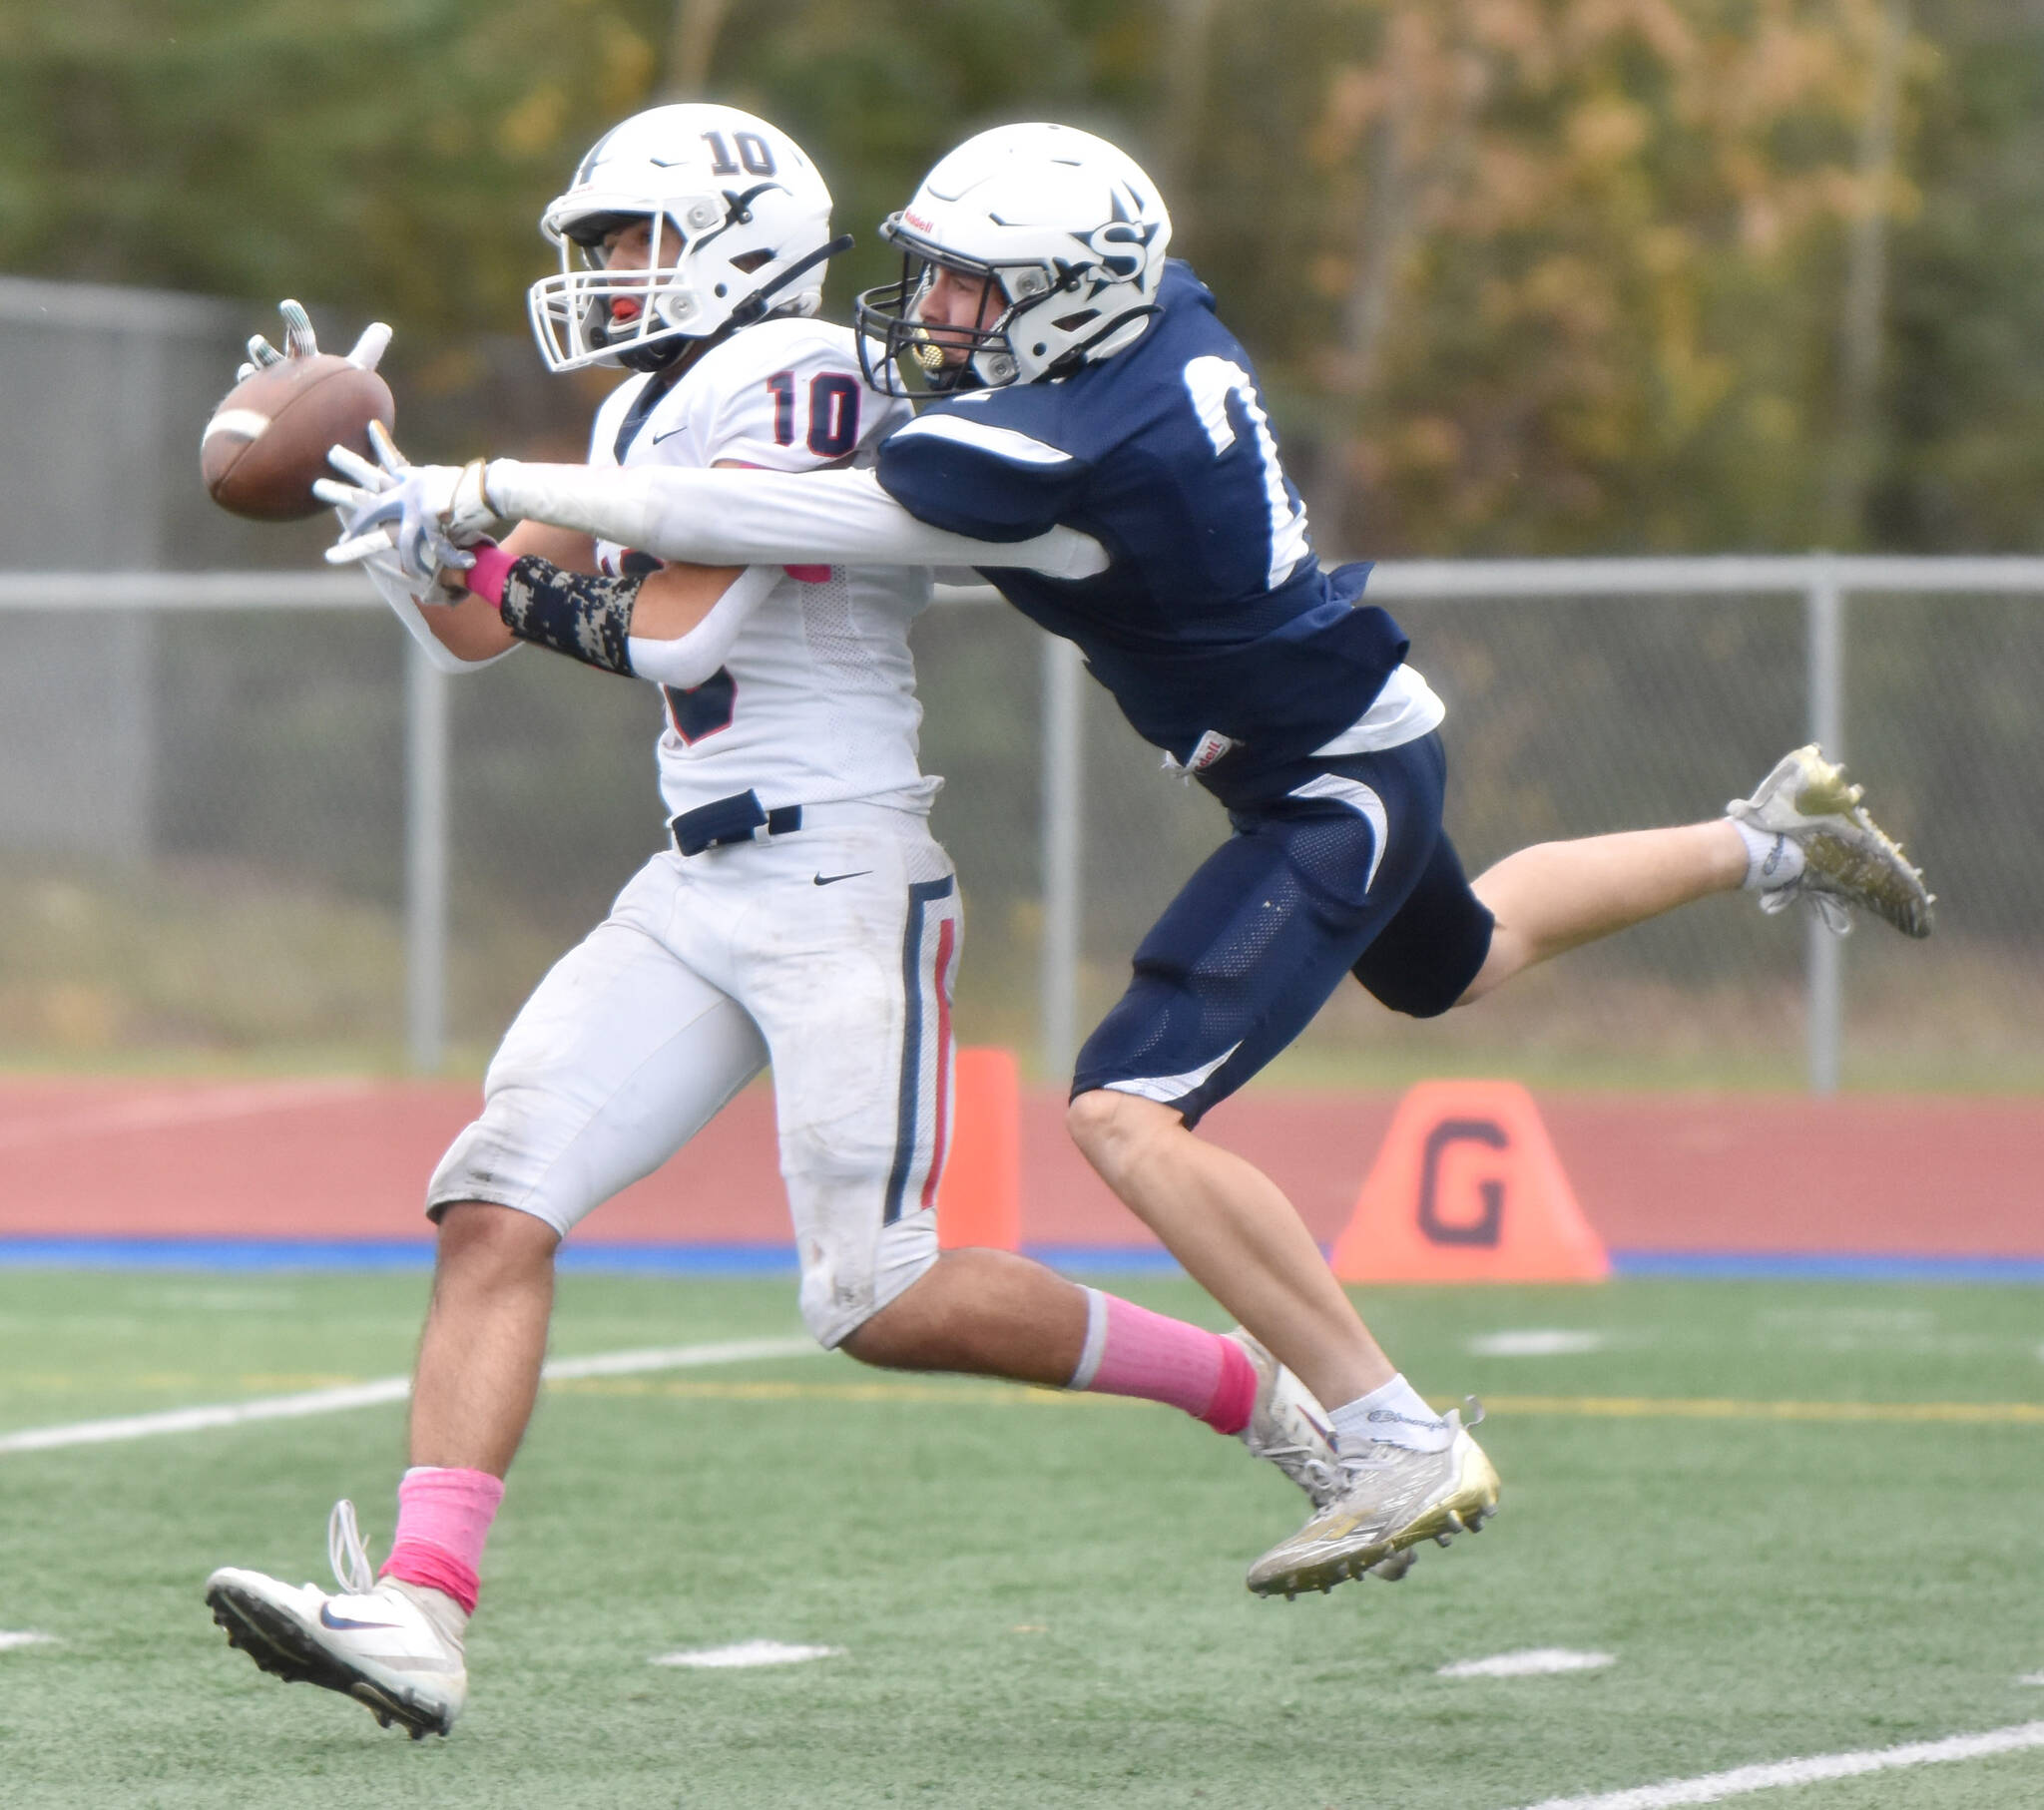 Soldotna’s Leigh Tacey breaks up a pass for North Pole’s Logan Fischer on Friday, Oct. 7, 2022, at Justin Maile Field at Soldotna High School in Soldotna, Alaska. (Photo by Jeff Helminiak/Peninsula Clarion)